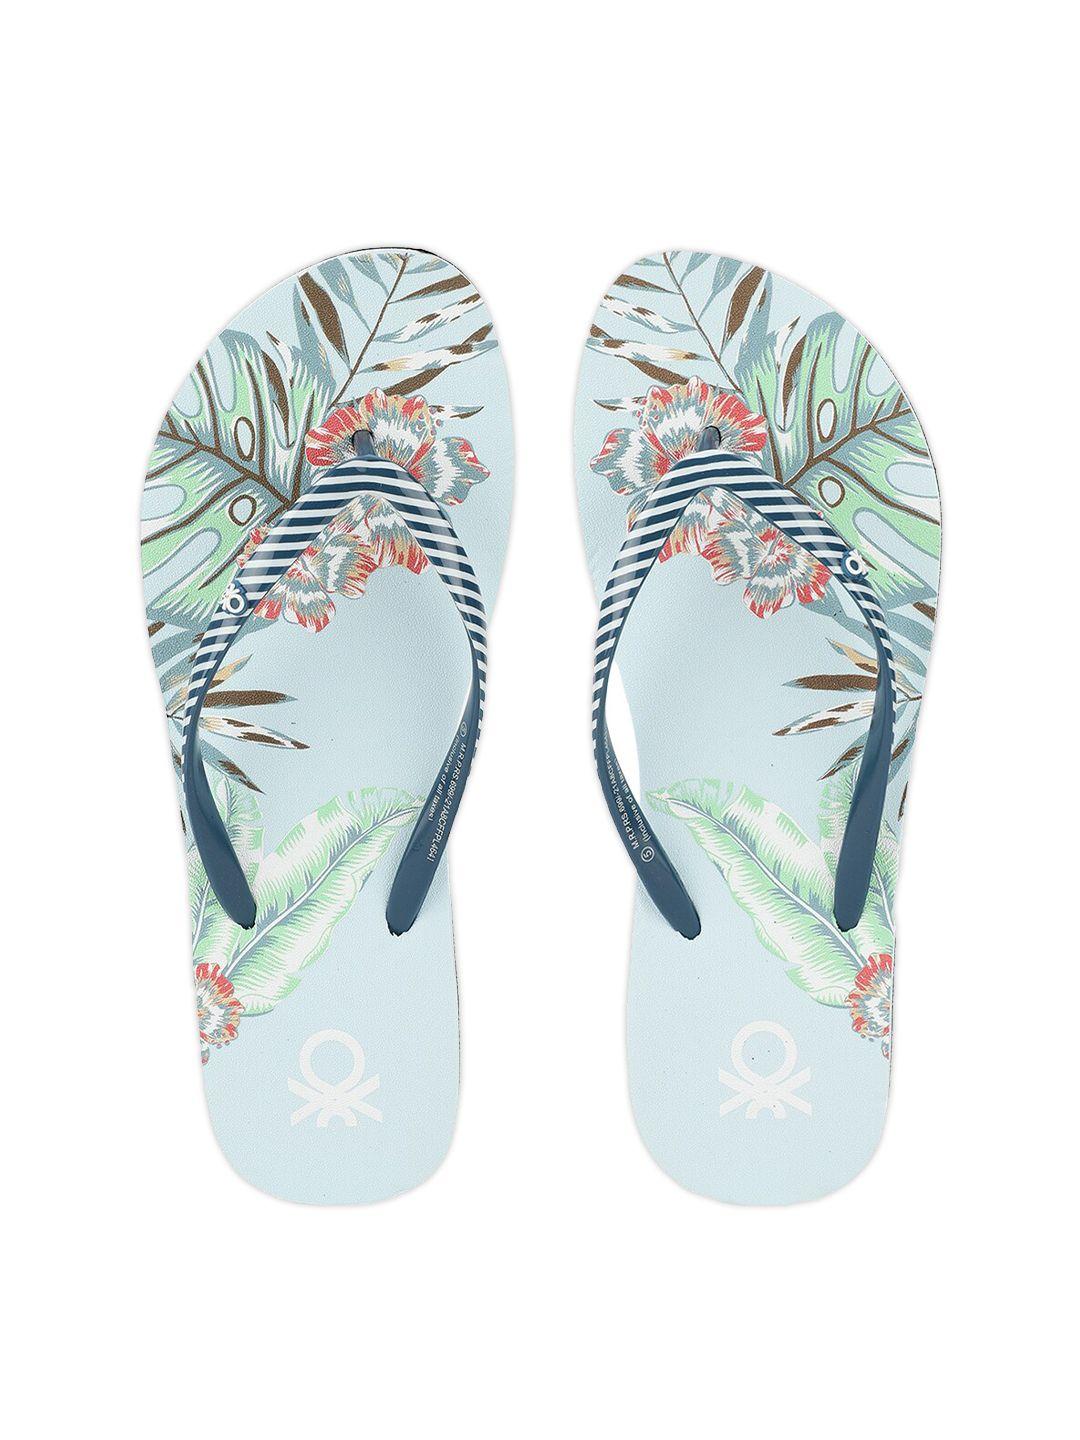 united colors of benetton women turquoise blue & green printed rubber thong flip-flops